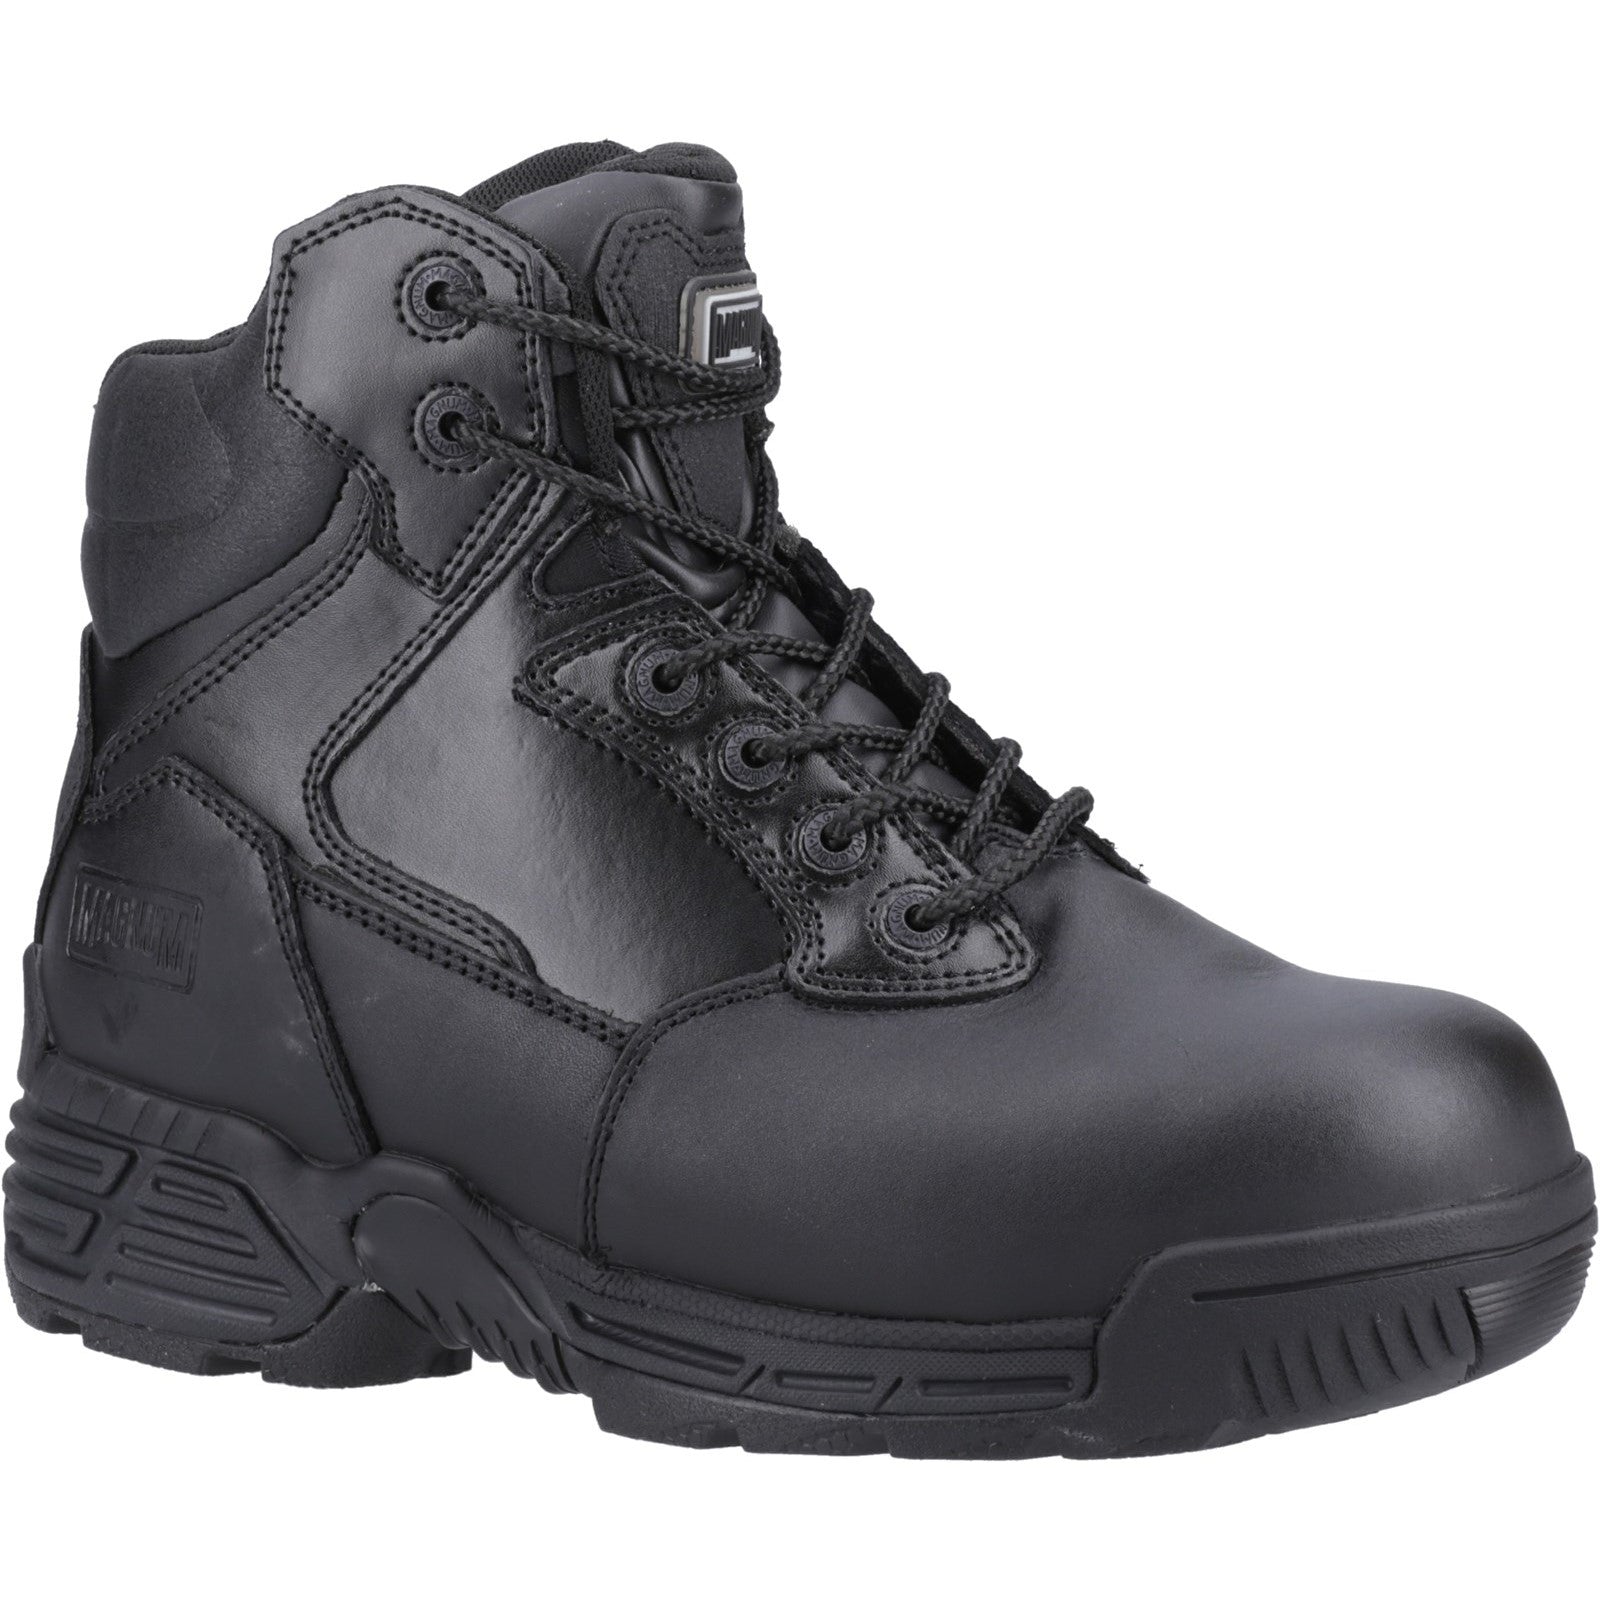 Magnum Stealth Force 6.0 CT CP Uniform Safety Boot